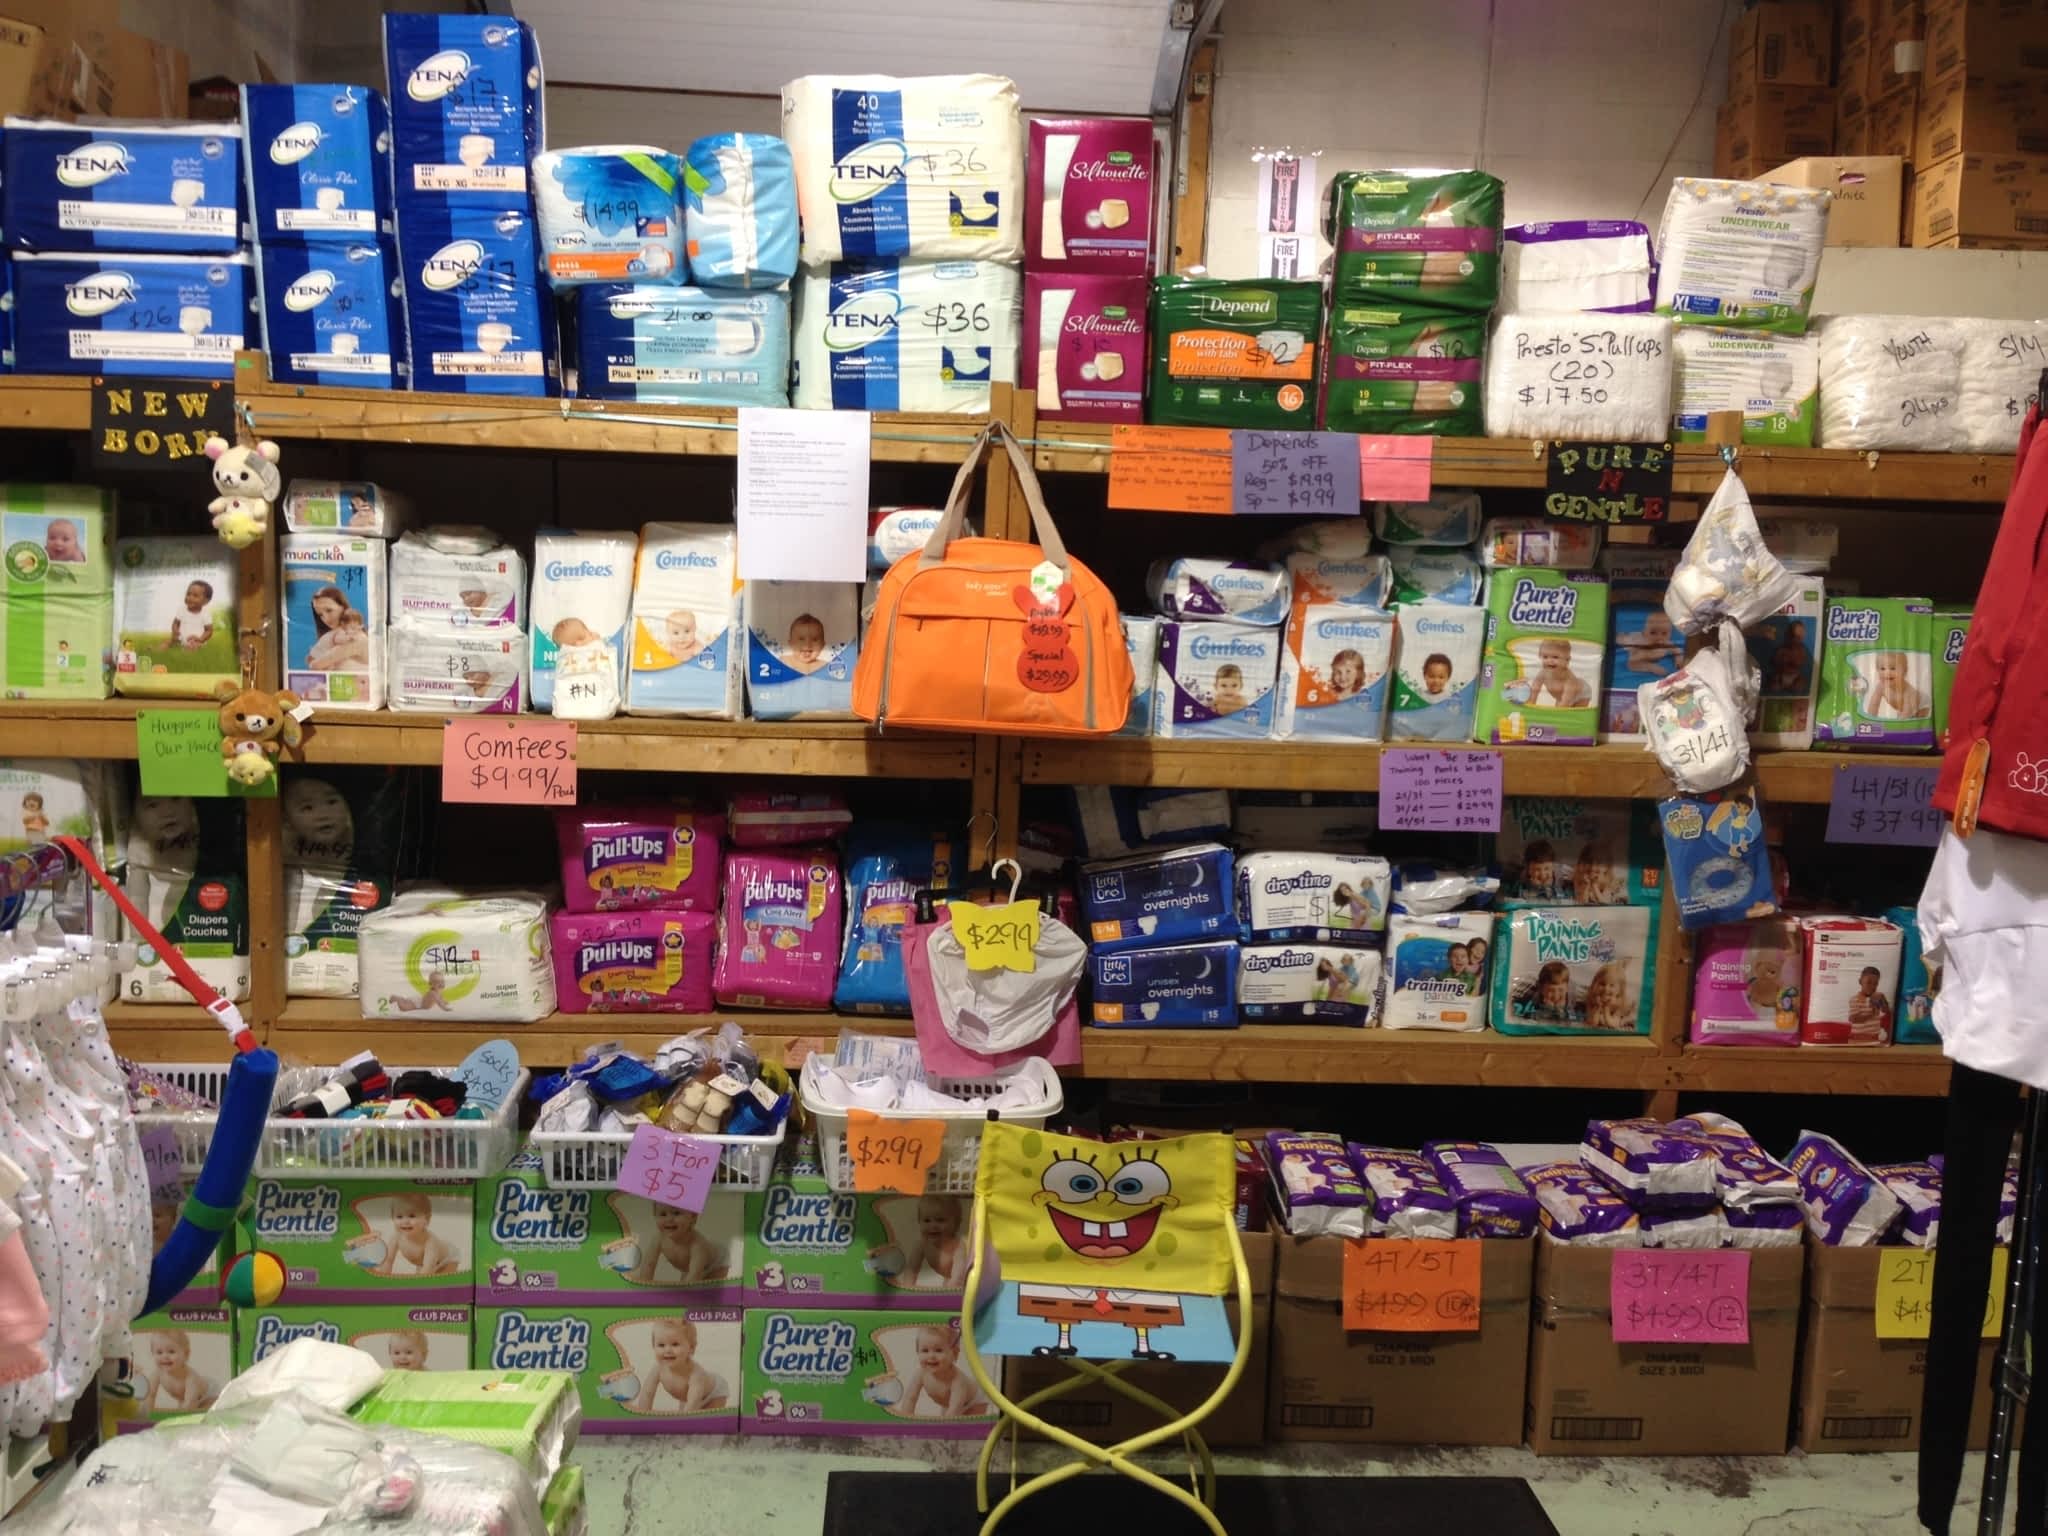 photo Diapers Kids Wear Factory Outlet